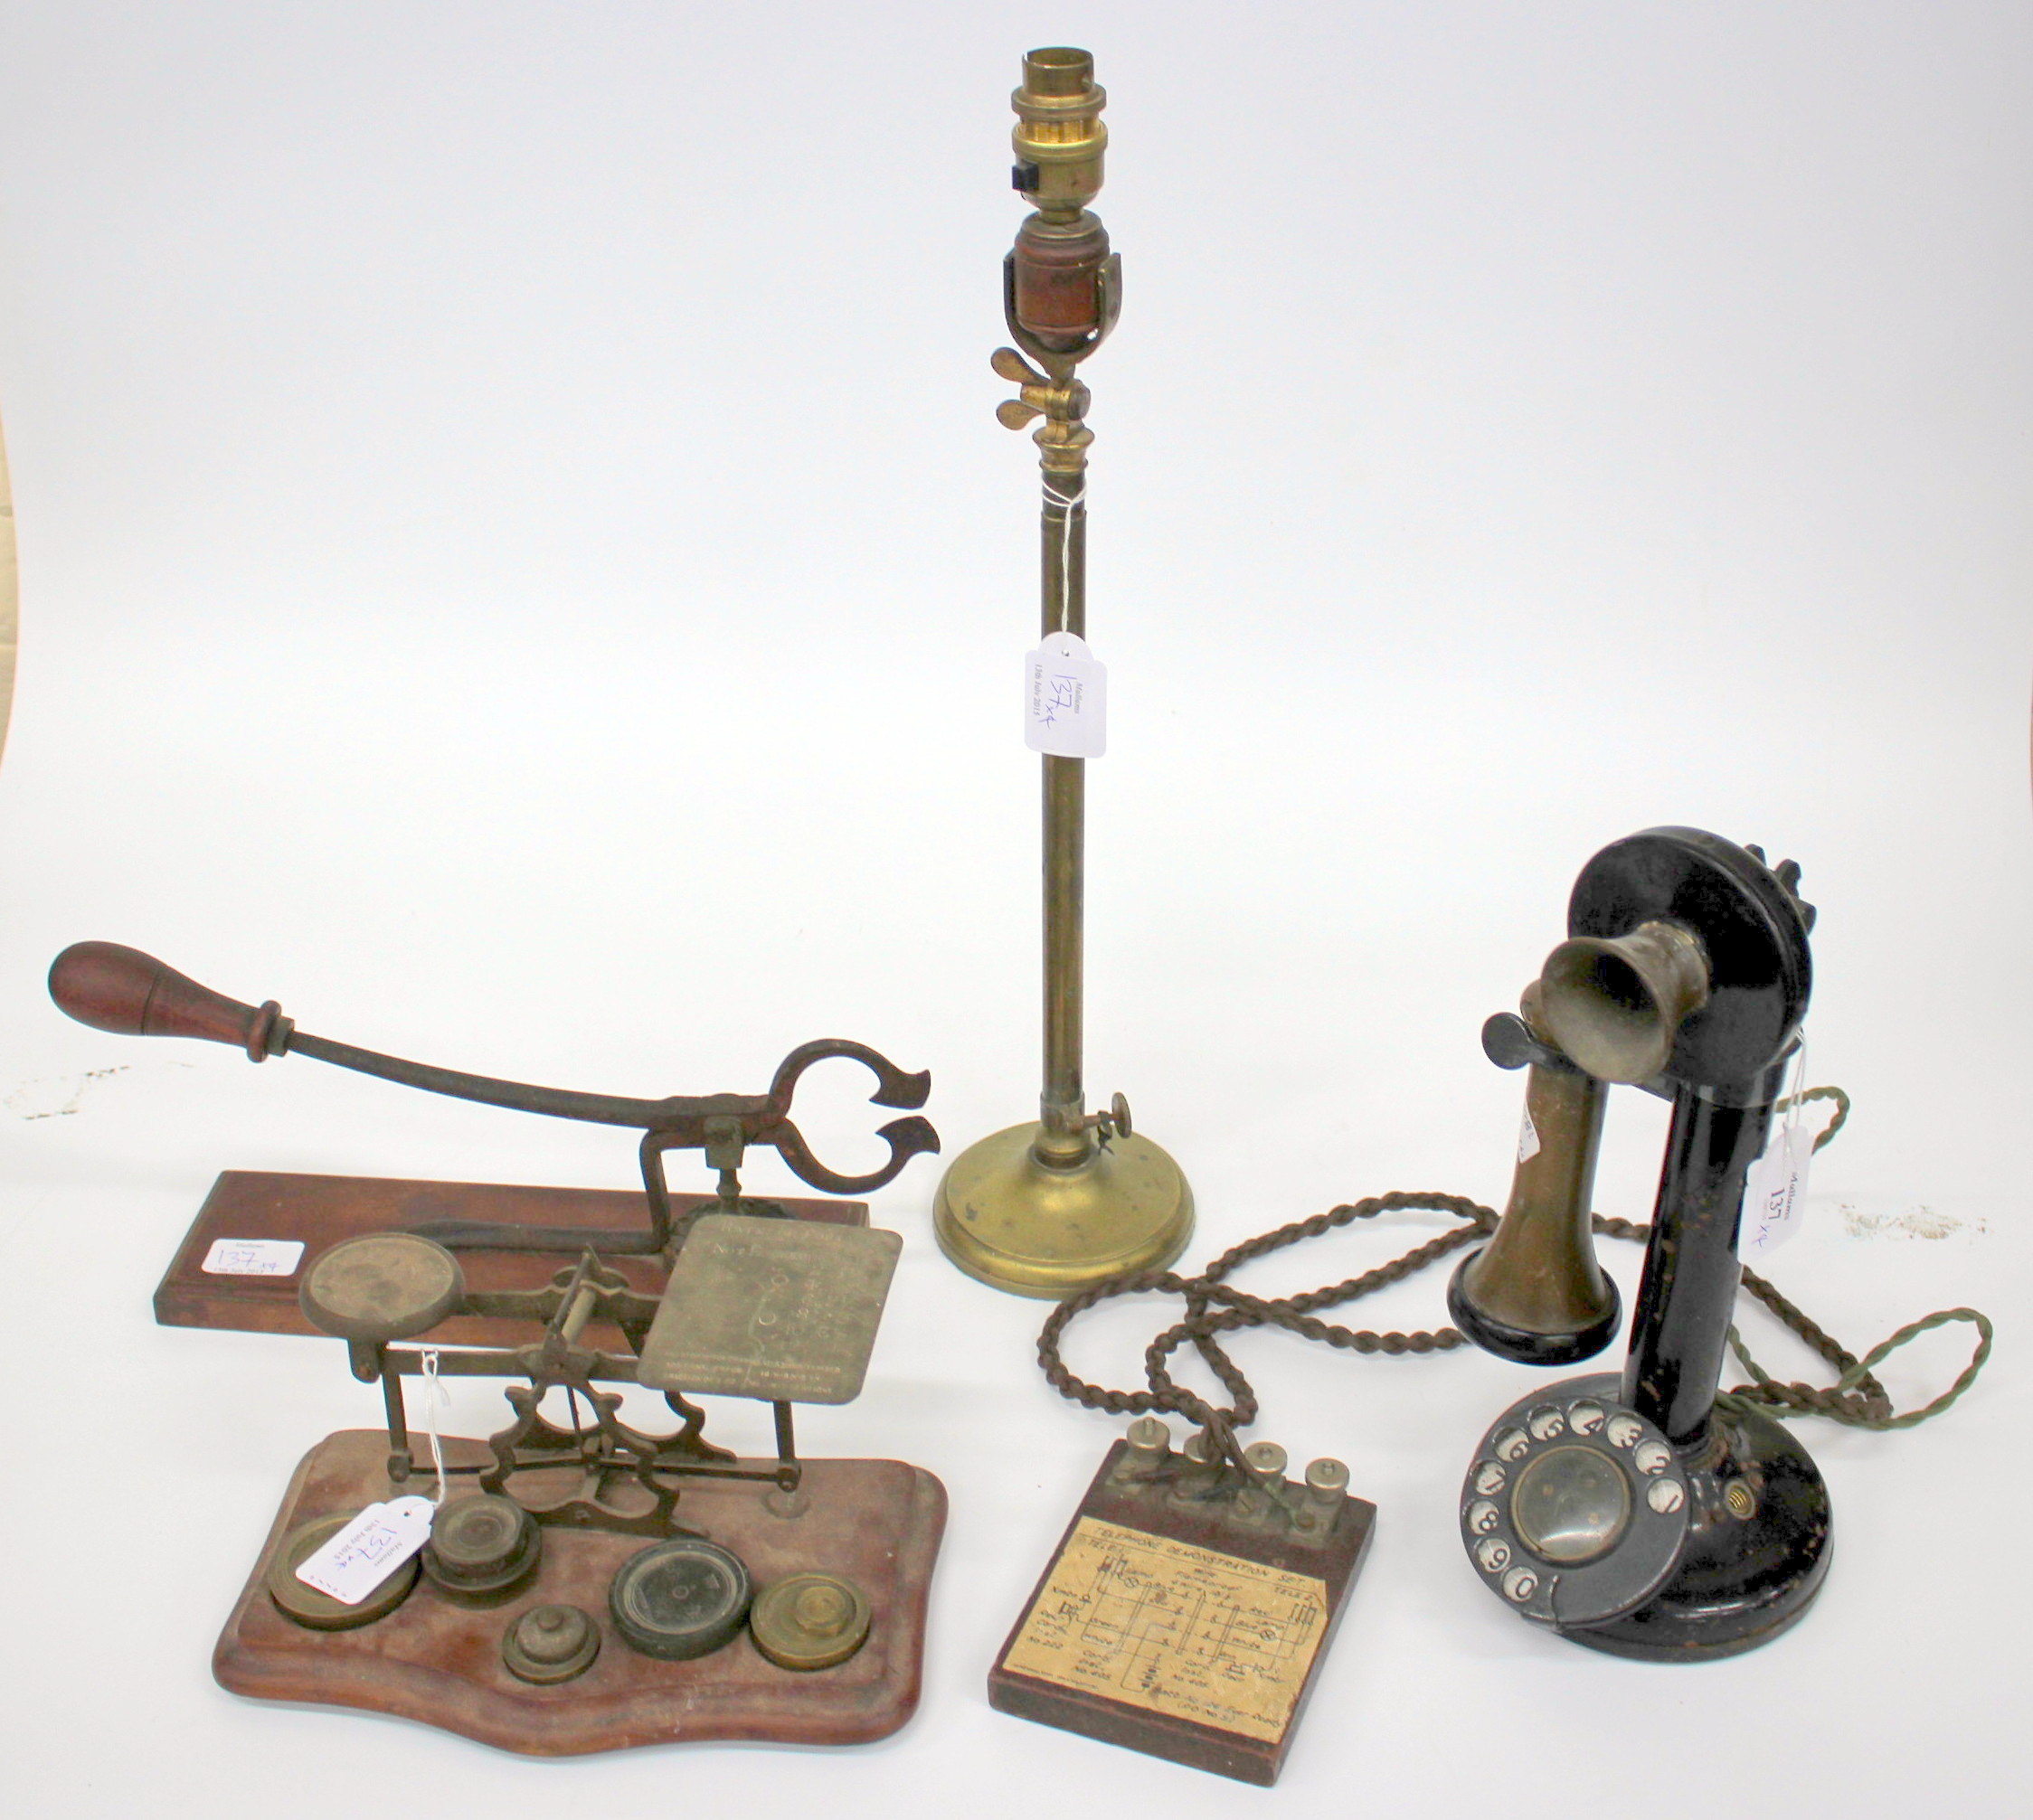 AN OLD BLACK LACQUERED CANDLESTICK TYPE TELEPHONE set up as a telephone demonstration set together